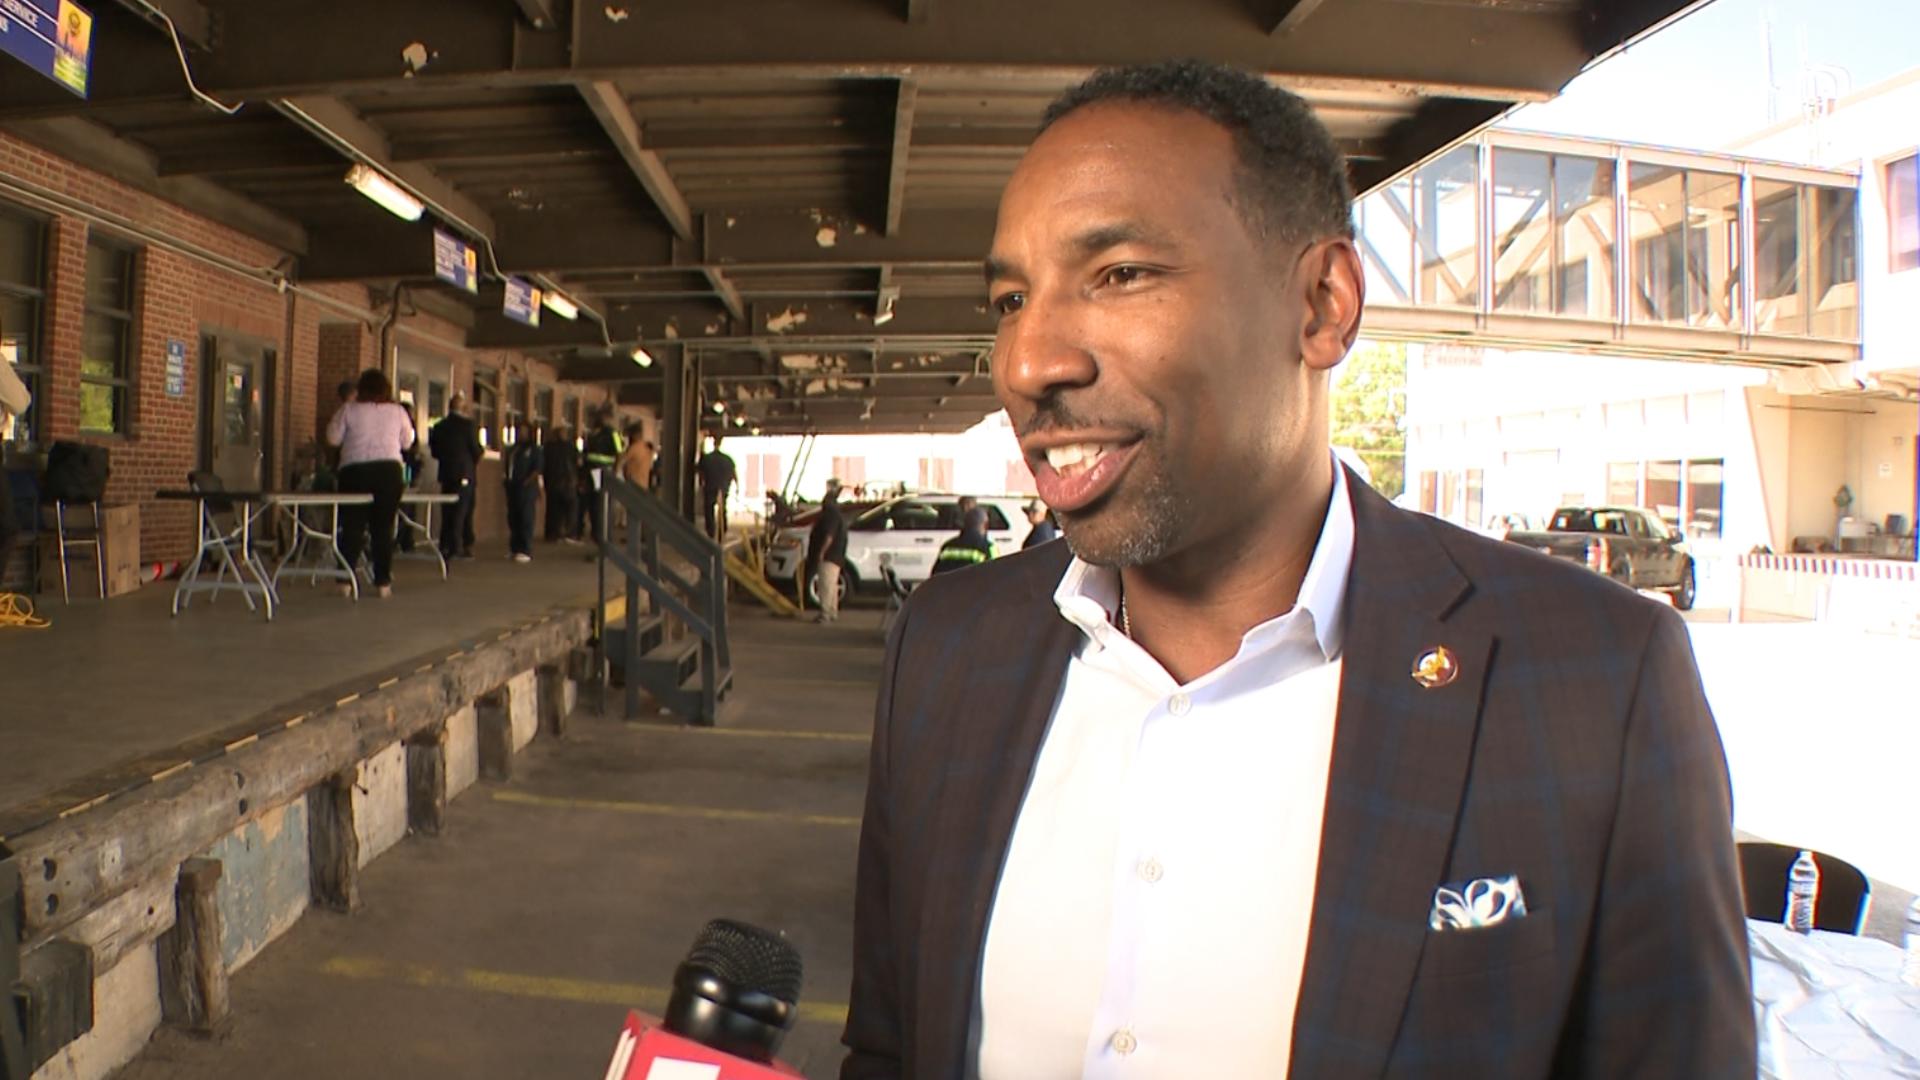 As Atlantans are still coping with the impact of the water main breaks, 11Alive spoke one-on-one with the Atlanta mayor, Andre Dickens, about what he's doing to help